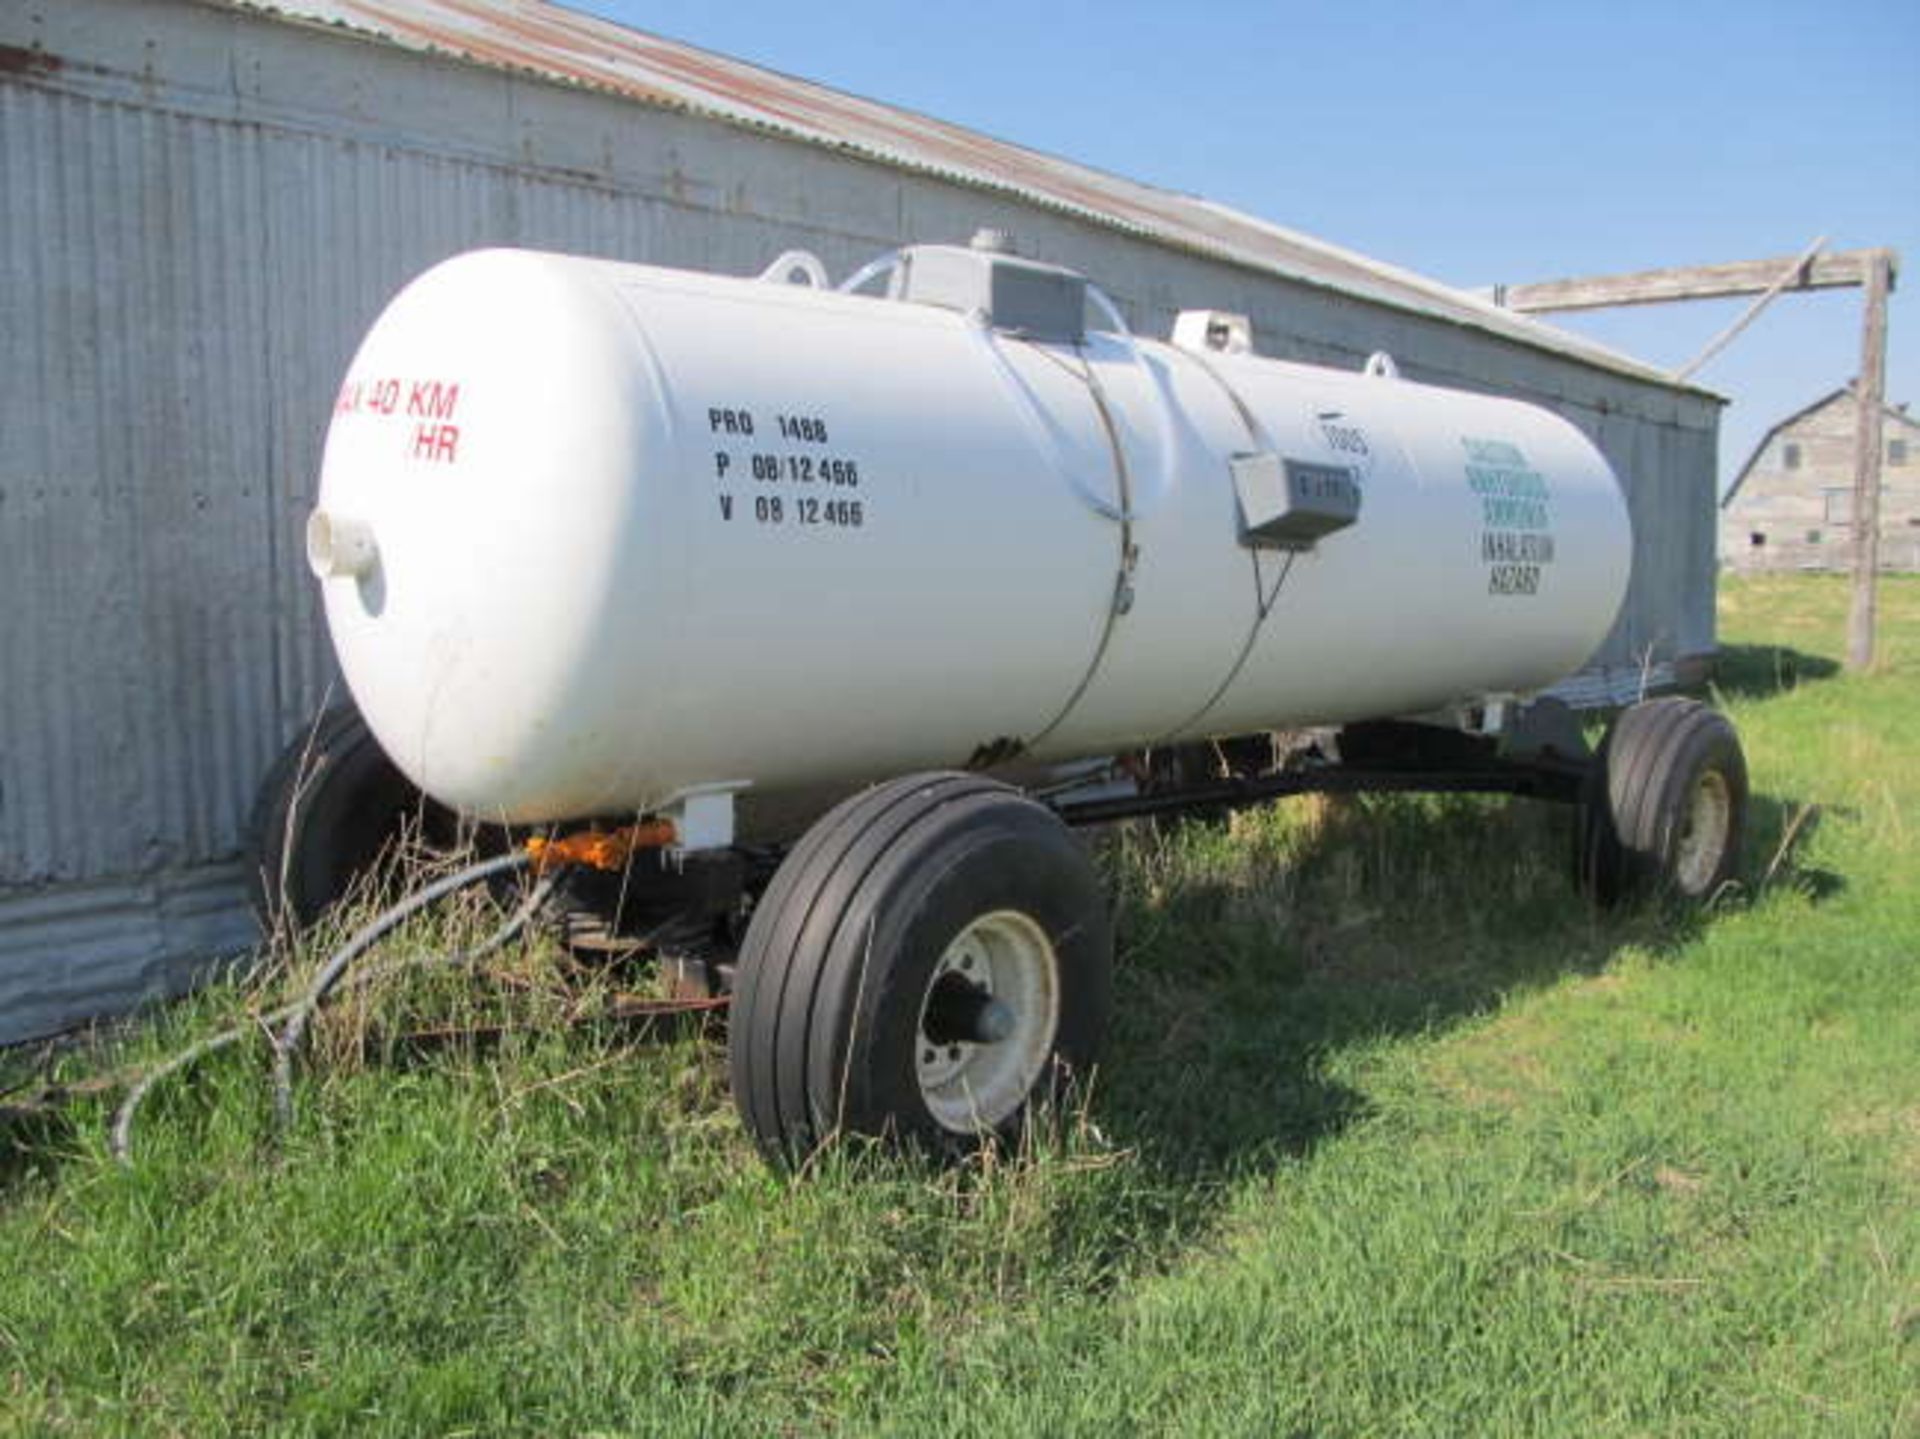 1600 GALLON ANHYDROUS TANK & TRAILER - Image 2 of 2